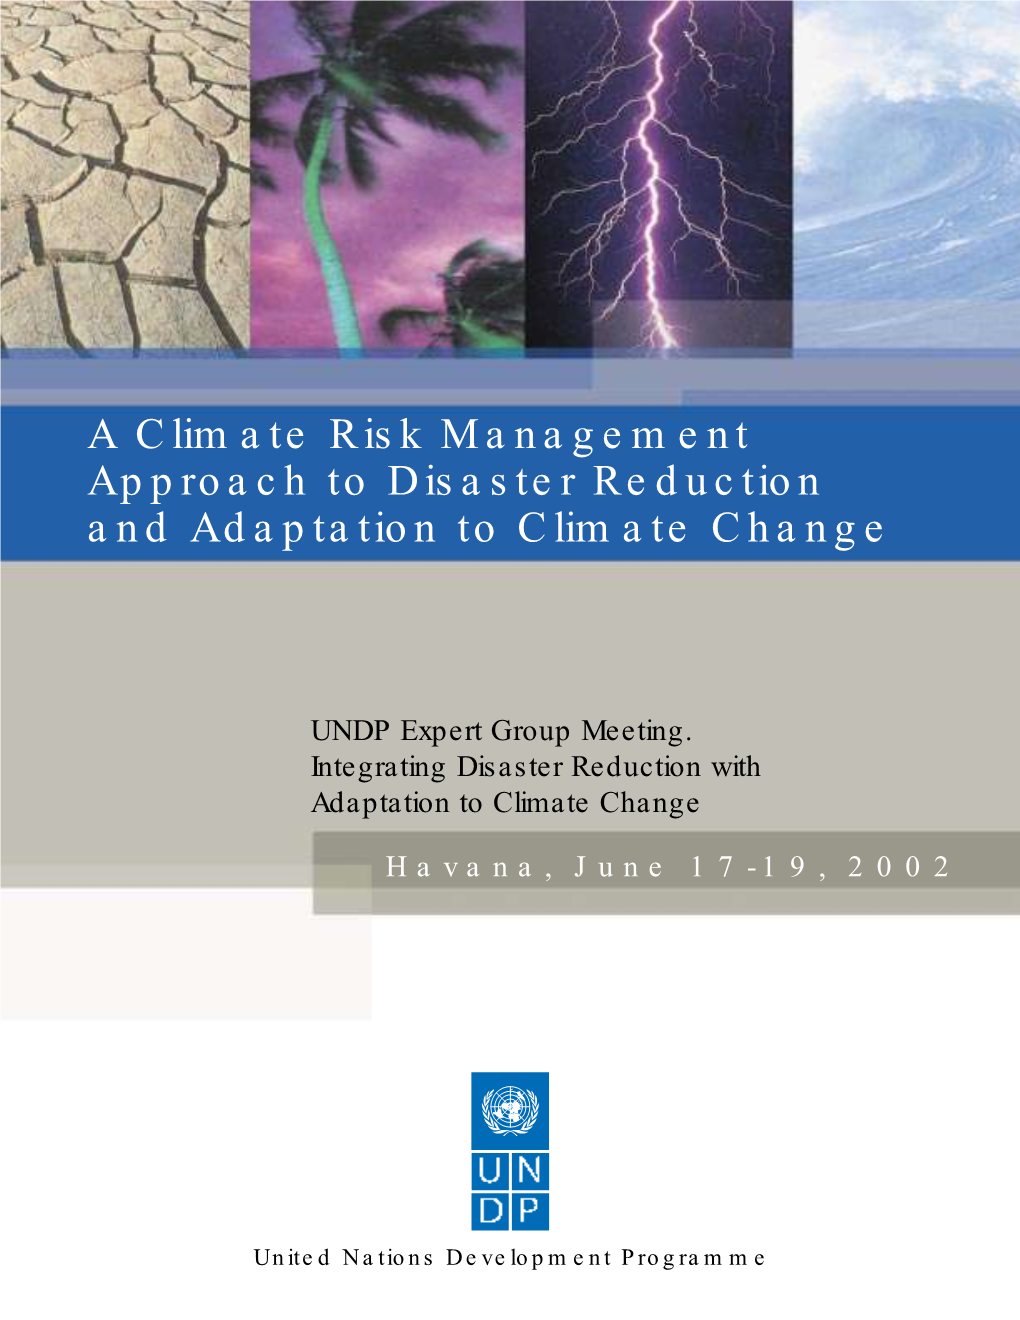 A Climate Risk Management Approach to Disaster Reduction and Adaptation to Climate Change